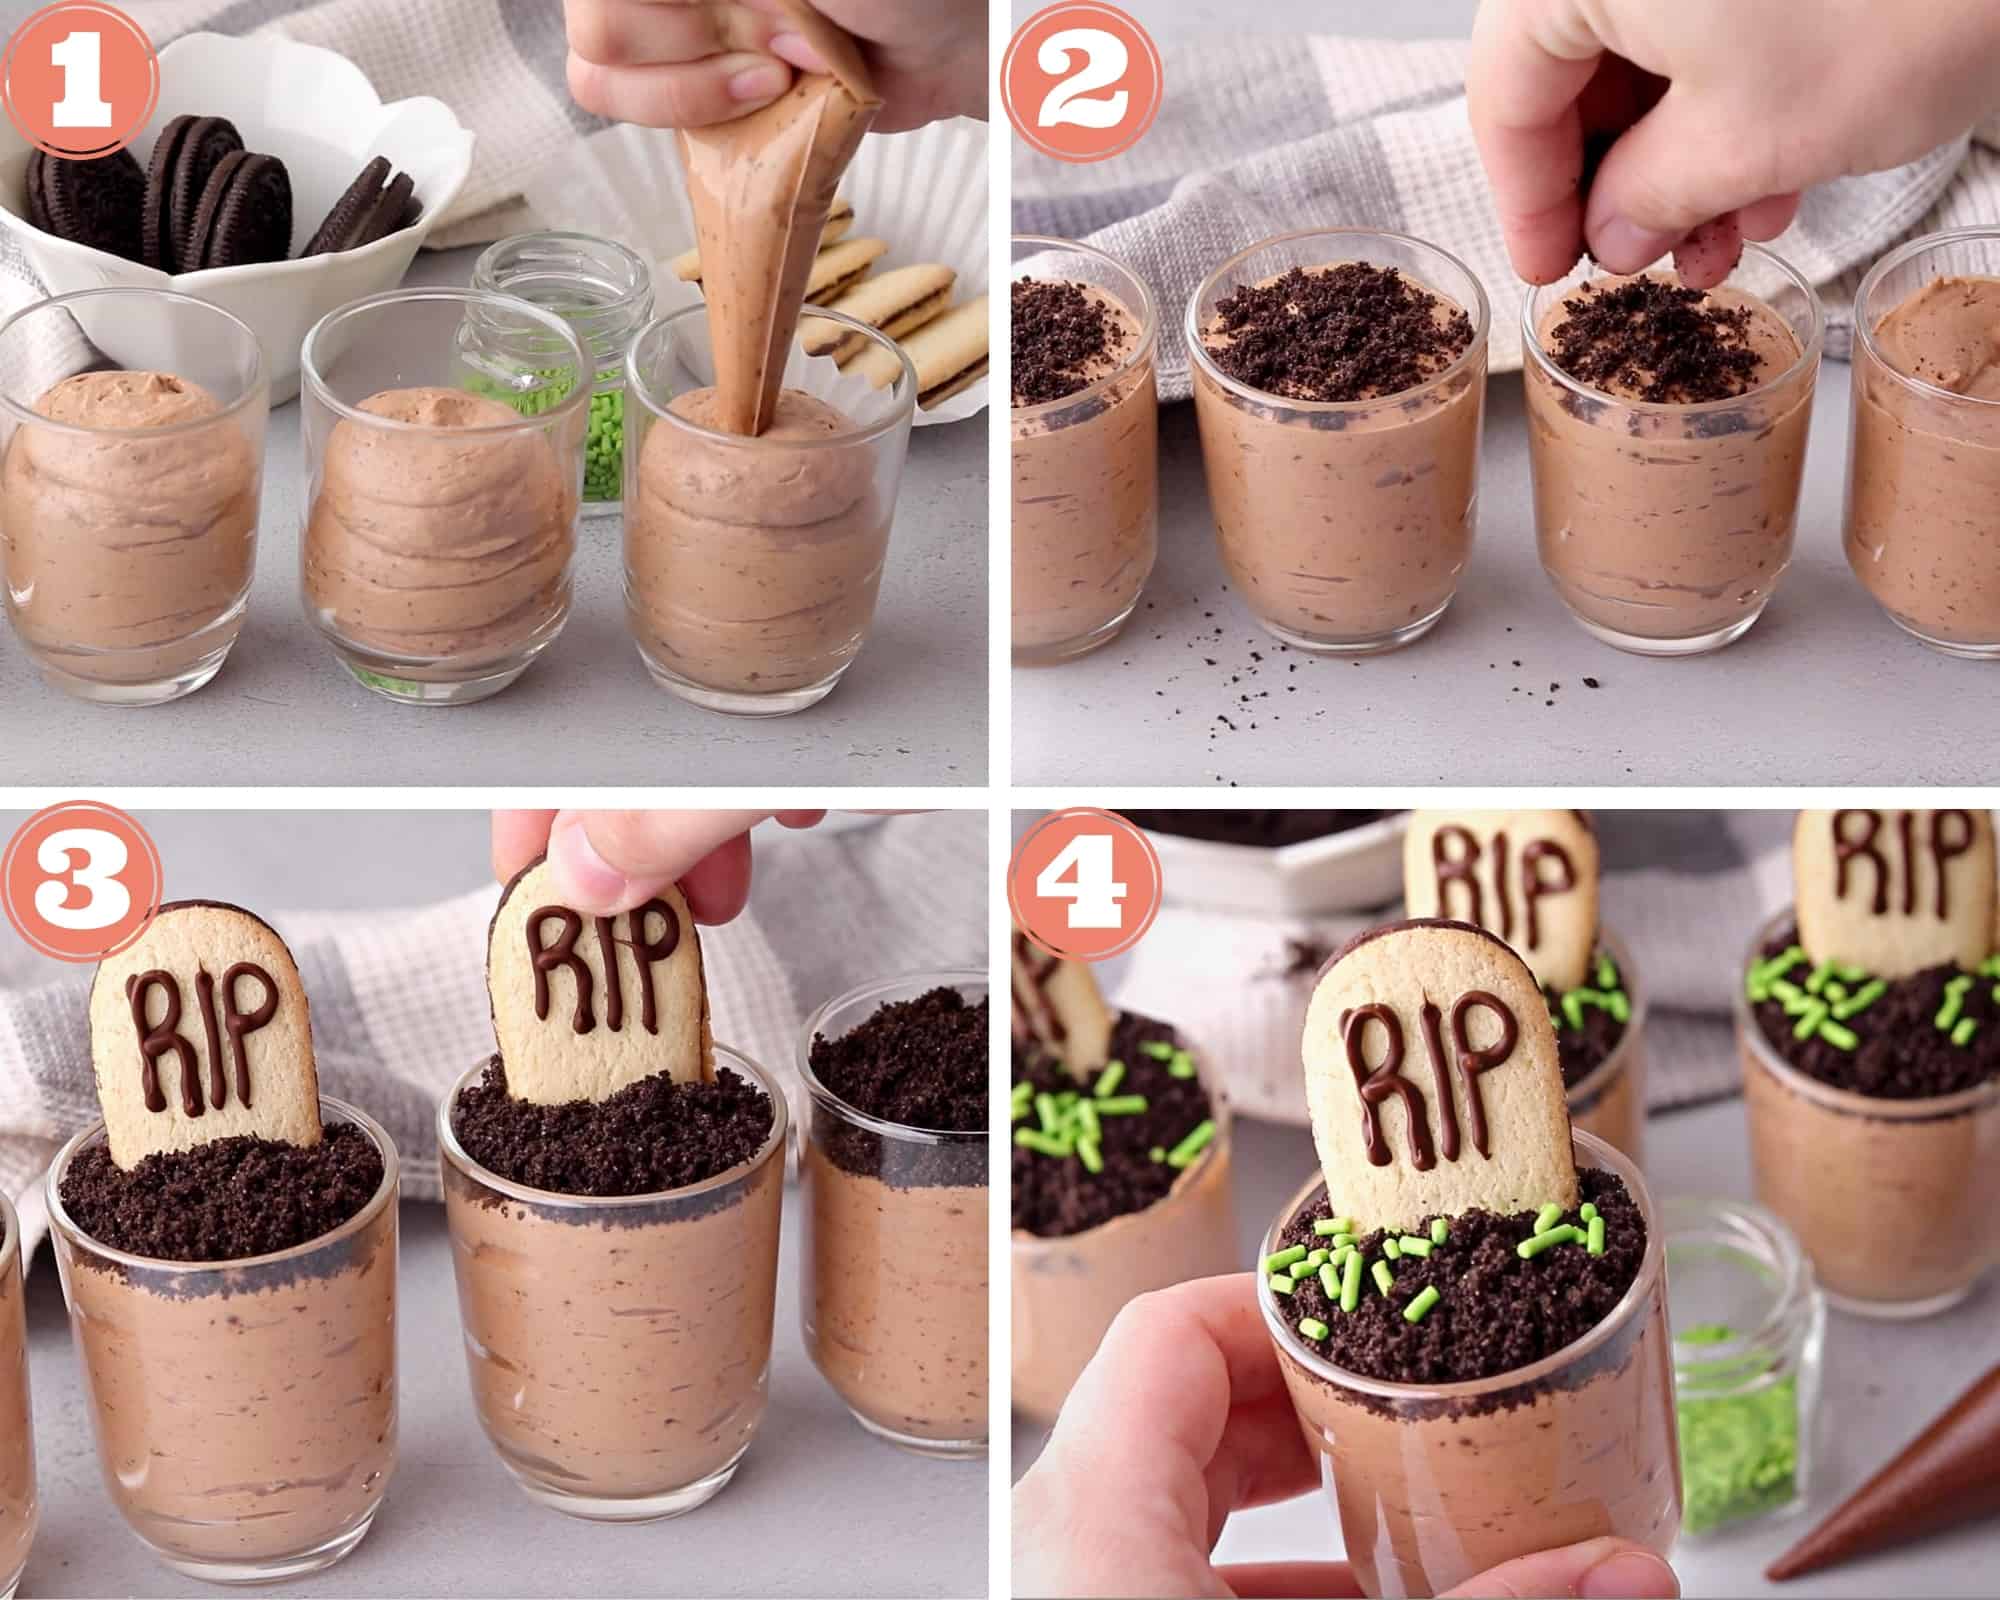 4 steps showing how to pipe mousse, top with dirt and assemble chocolate mousse graveyards for halloween